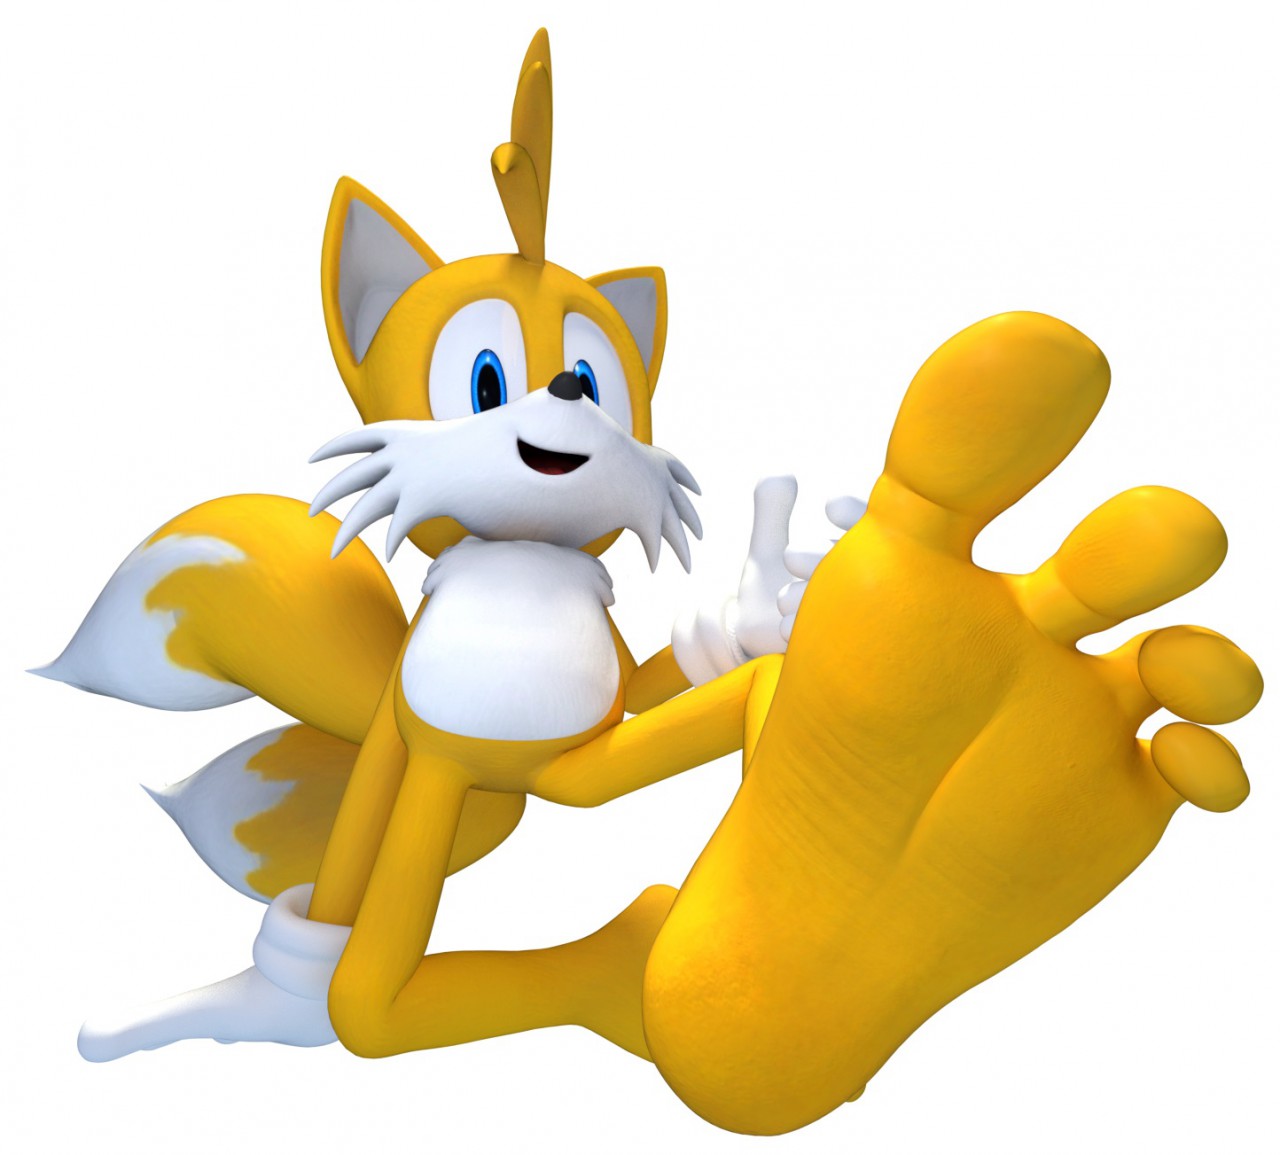 3D Tails Foot Show-off. 